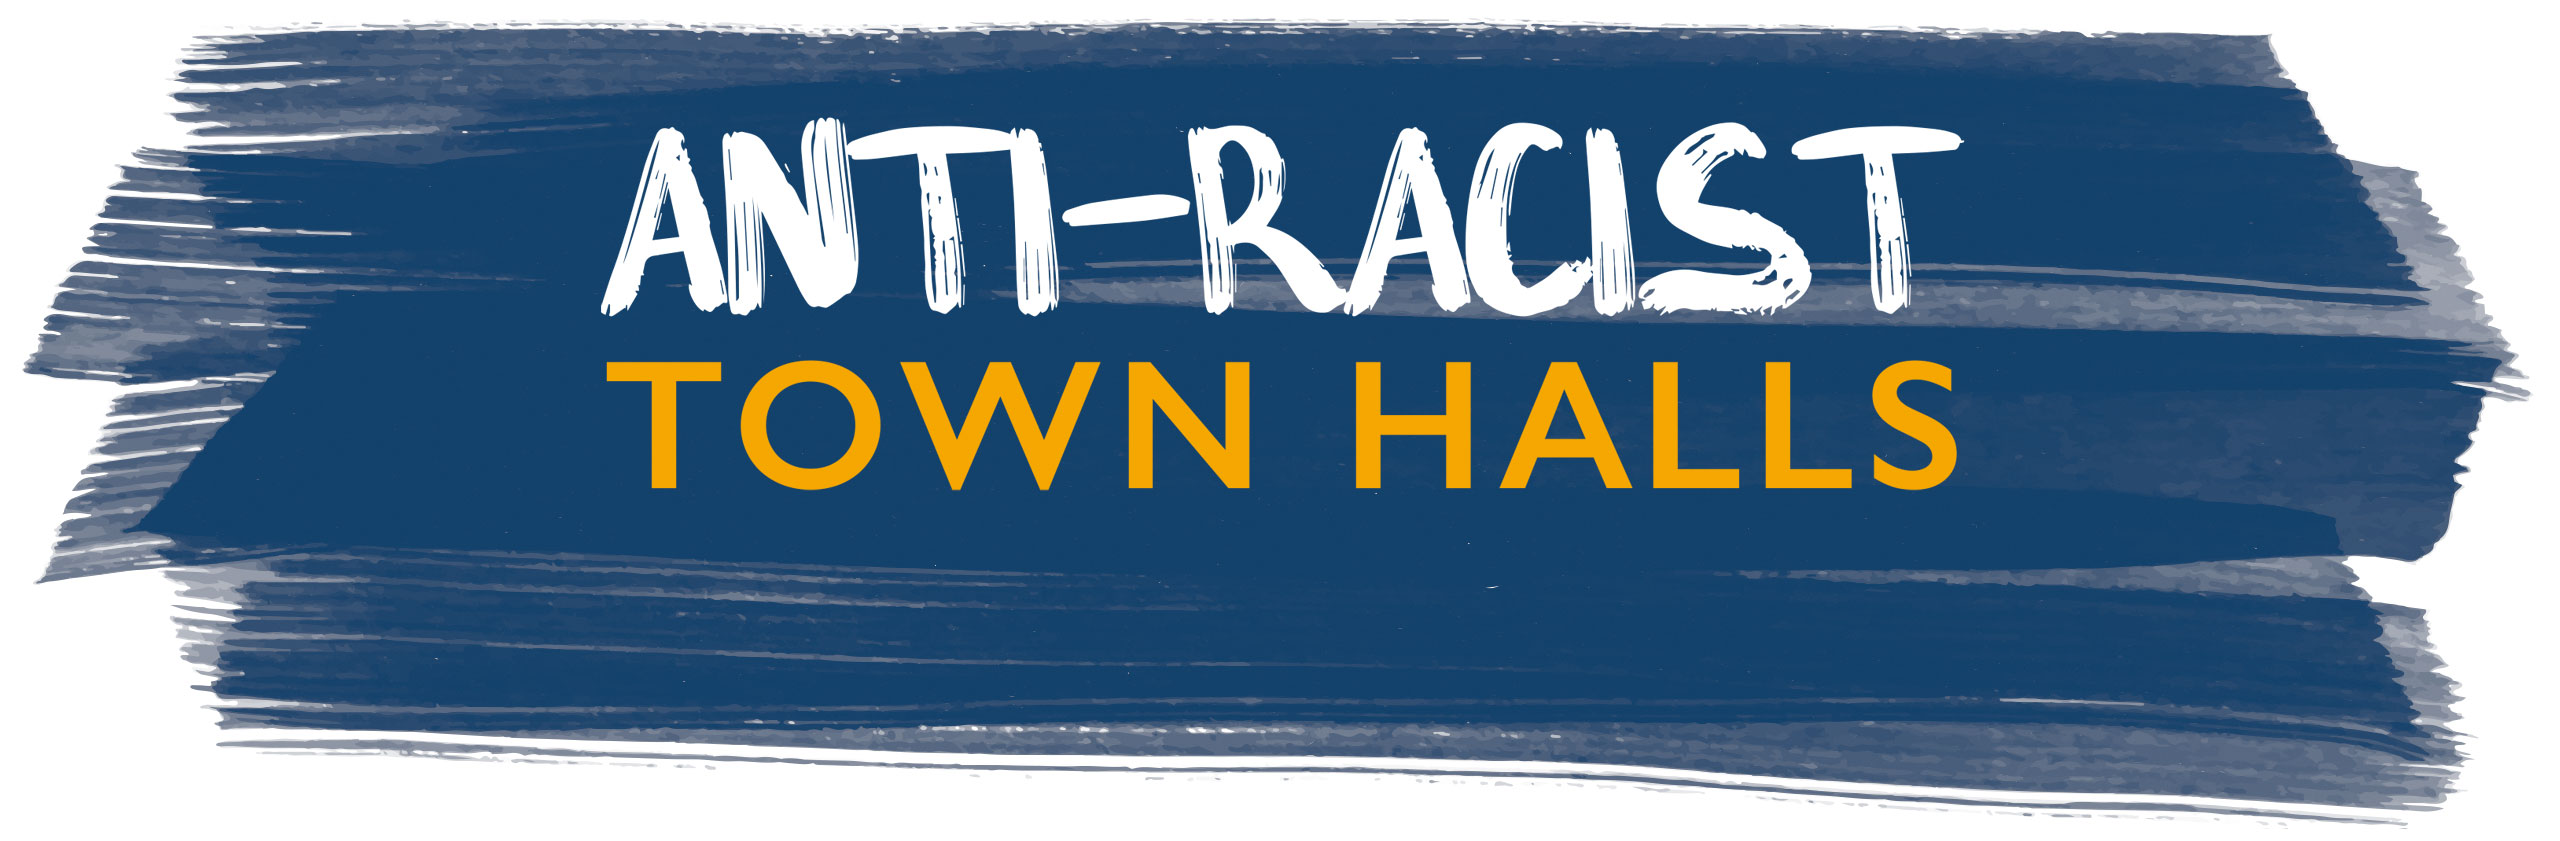 DMPS to Host Series of Anti-Racist Town Halls